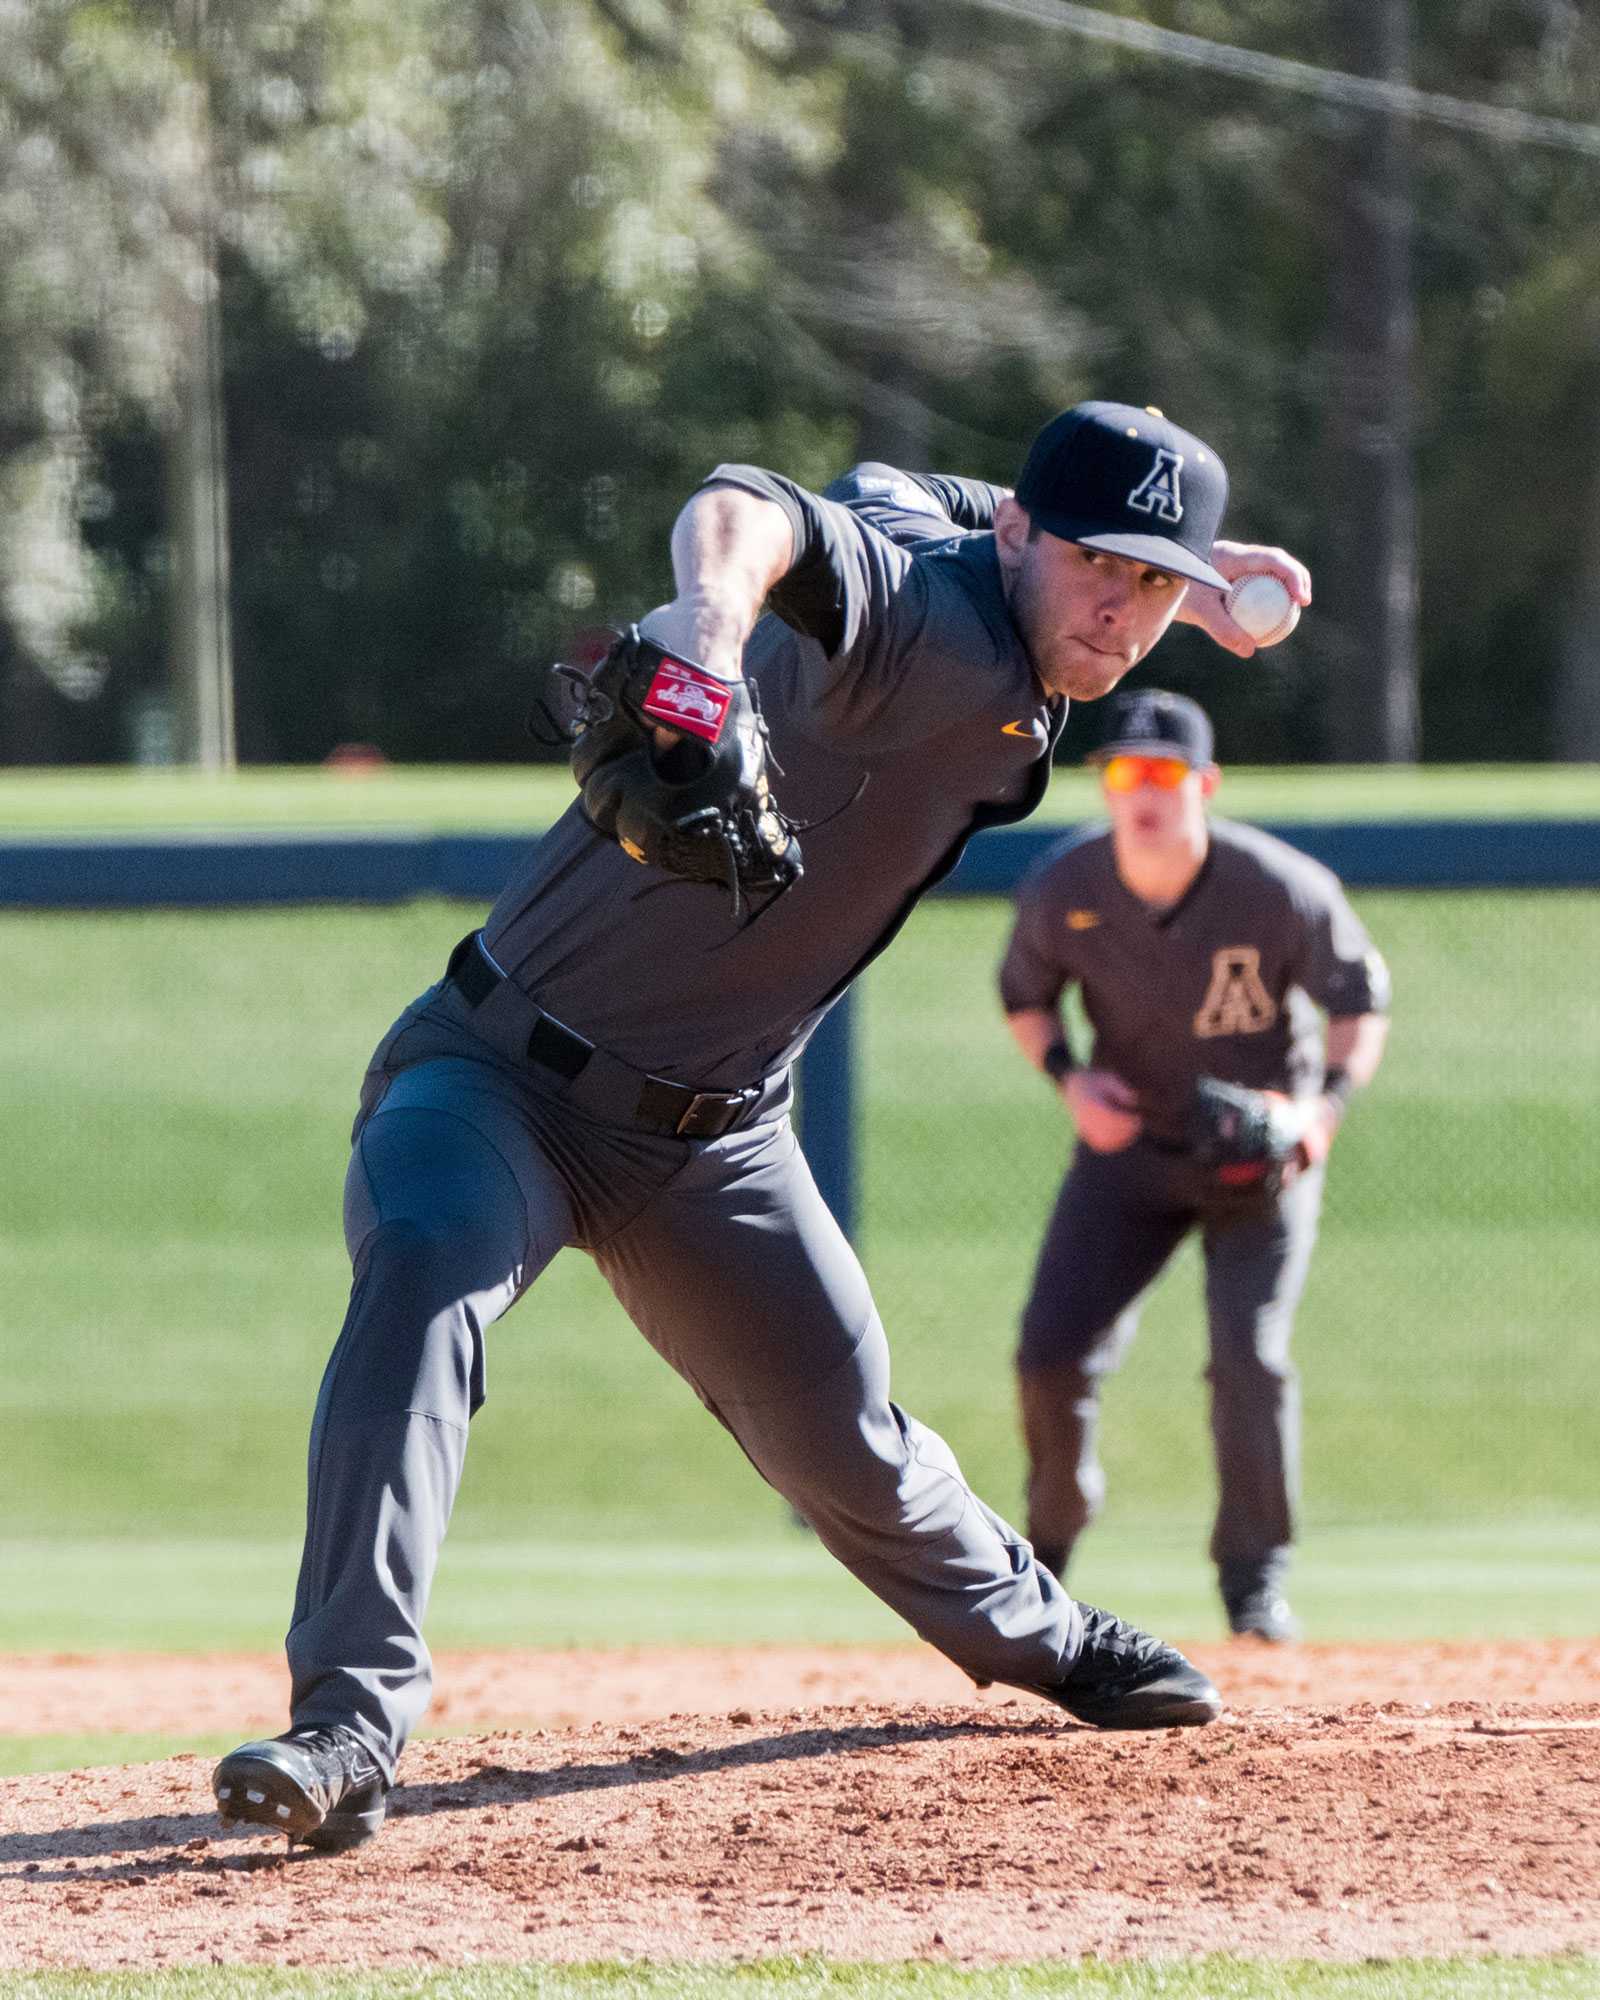 Senior pitcher Tristan Helms throwing a pitch during a game in the 2017 season. 